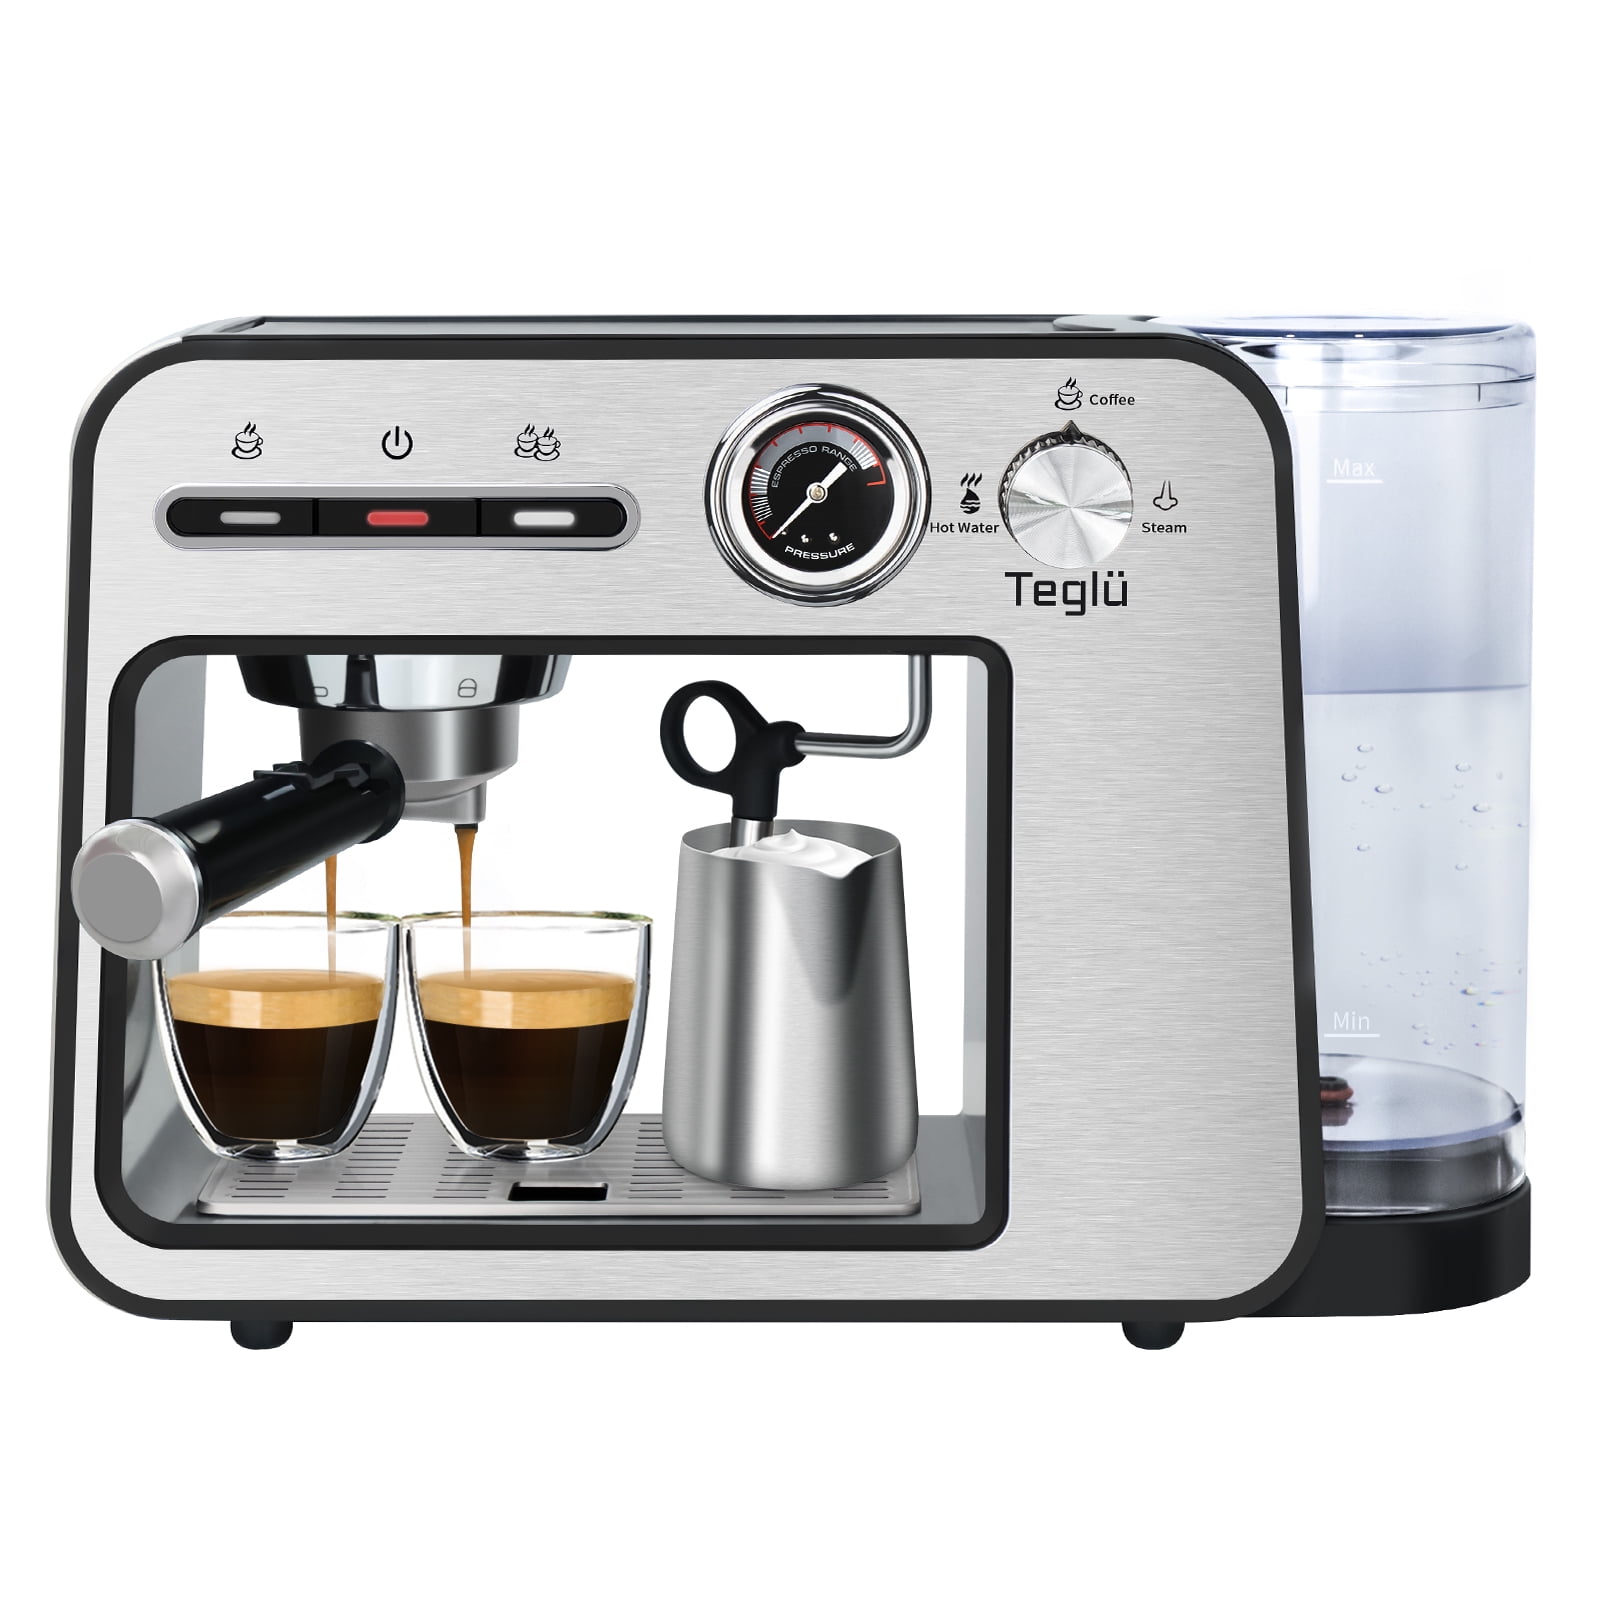 Café Bellissimo Semi-Automatic Espresso Machine with 15 bars of pressure,  Milk Frother, and Built-In Wi-Fi Matte Black C7CESAS3RD3 - Best Buy